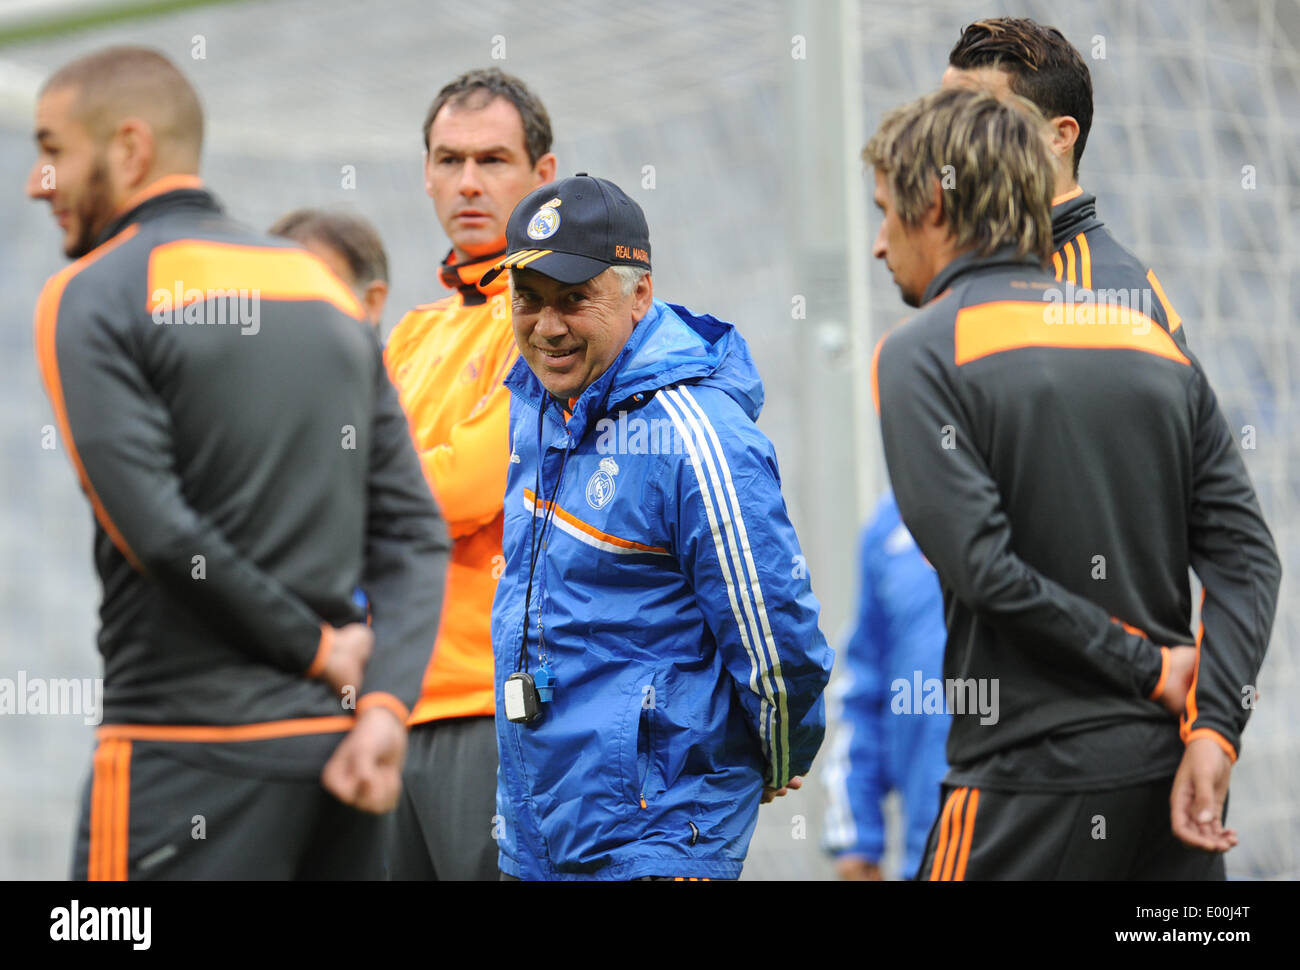 Munich, Germany. 28th Apr, 2014. Madrid's head coach Carlo Ancelotti (C) stands between his players Karim Benzema (L-R), Fabio Coentrao and Cristiano Ronaldo during a training session of Spanish soccer club Real Madrid at Allianz Arena in Munich, Germany, 28 April 2014. Real Madrid faces Bayern Munich in the UEFA Champions League semifinals second leg match on 29 April 2014. Photo: ANDREAS GEBERT/DPA/Alamy Live News Stock Photo